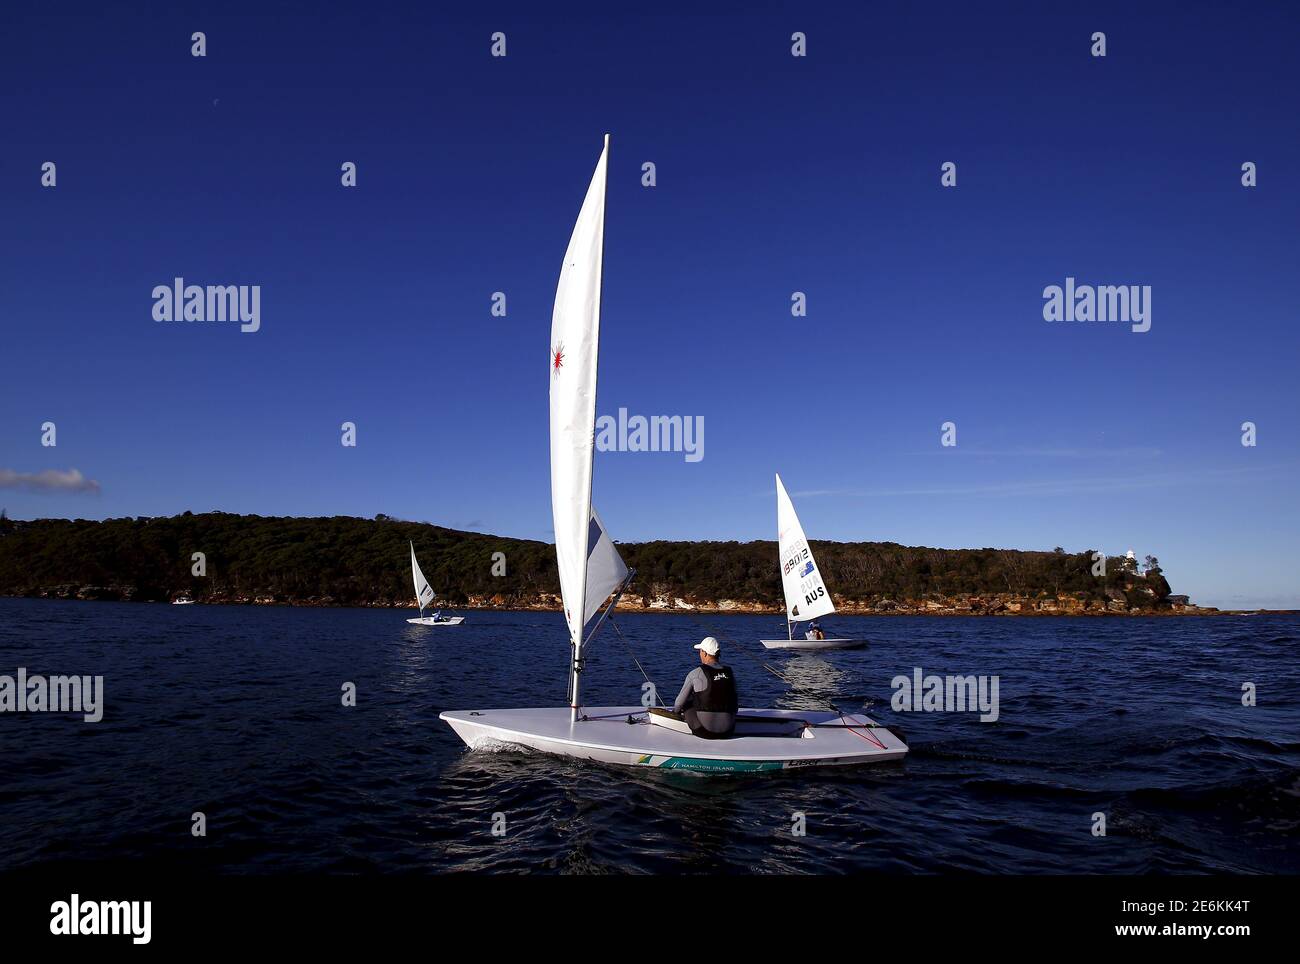 Australian Olympic team sailor Tom Burton (C) sails his laser yacht during  a training session next to Finn Alexander (L) and Stuart Plenderleith, both  contenders to represent Australia at the World Youth